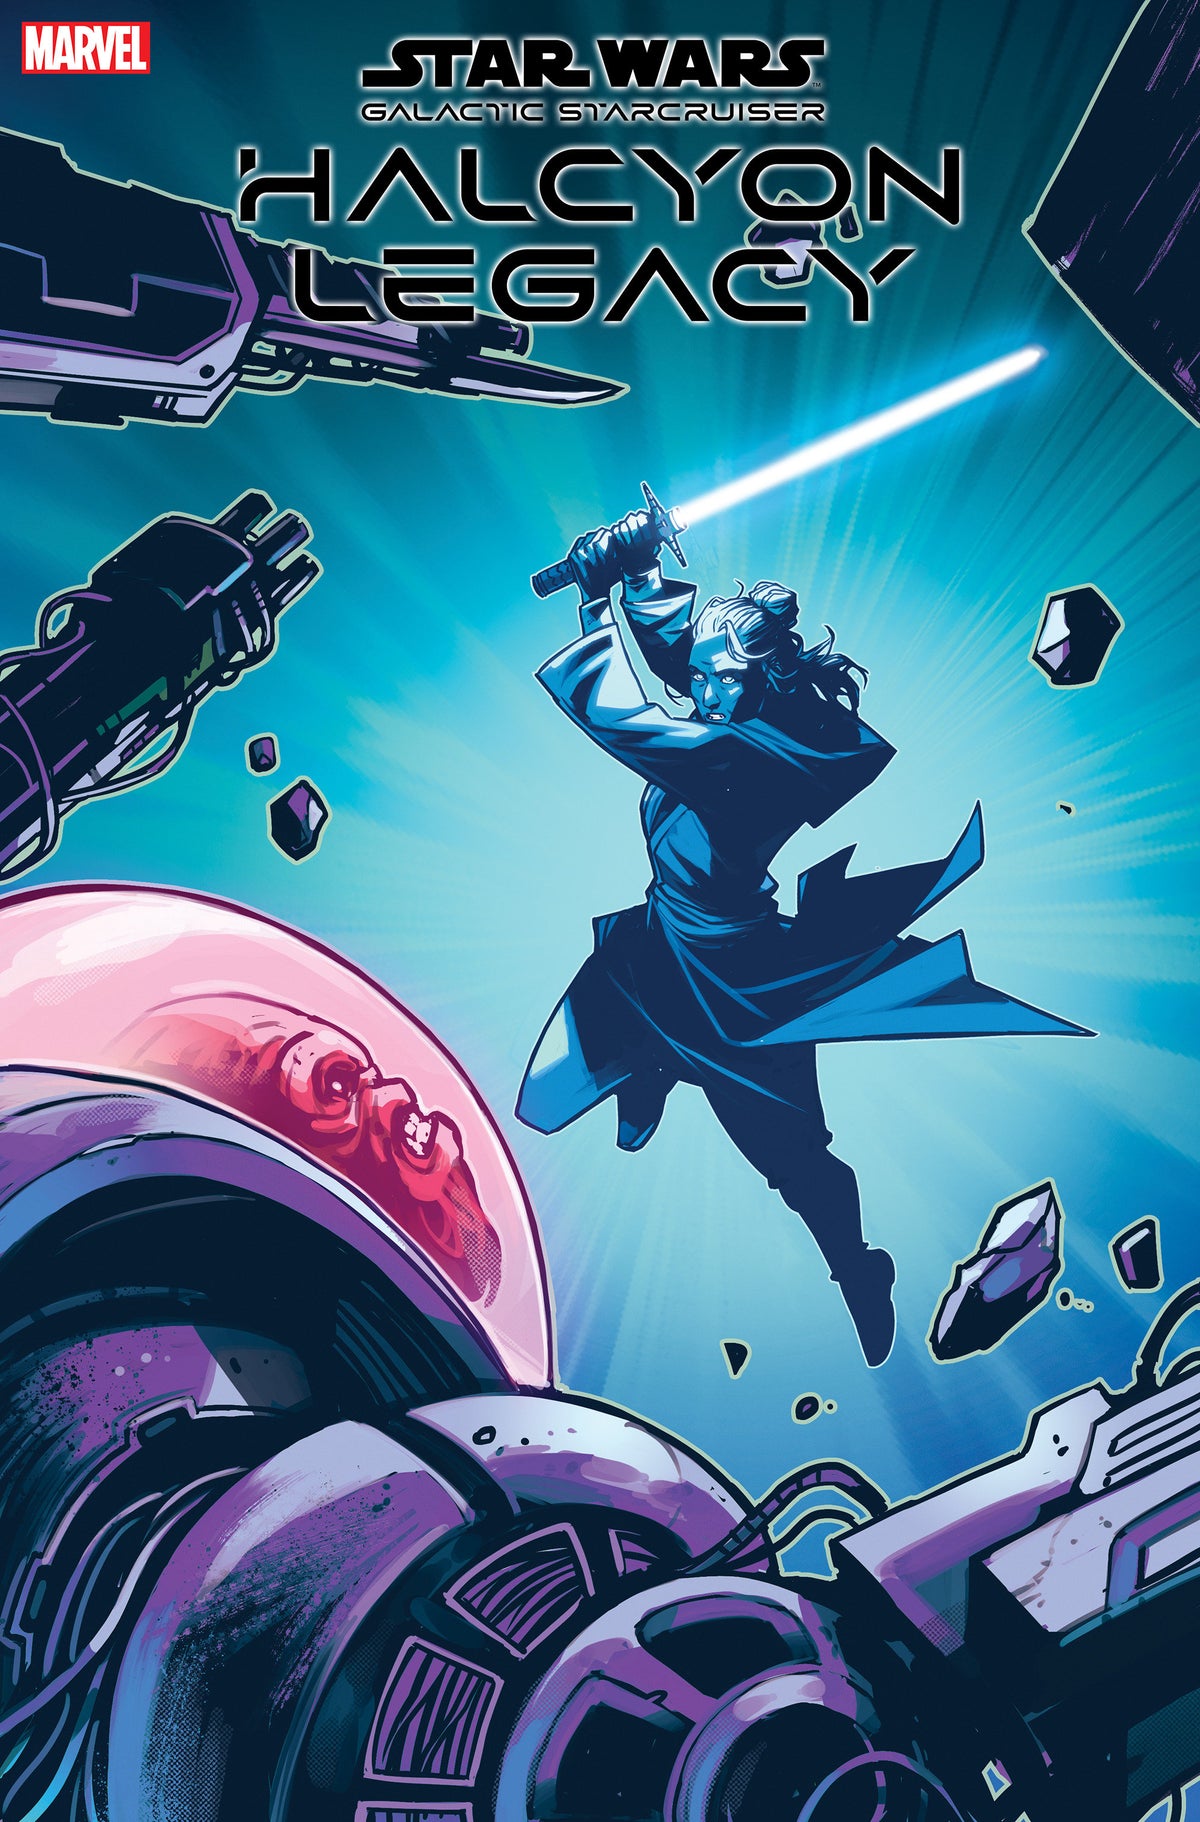 Image of Star Wars The Halcyon Legacy 1 Wijngaard Variant comic sold by Stronghold Collectibles.